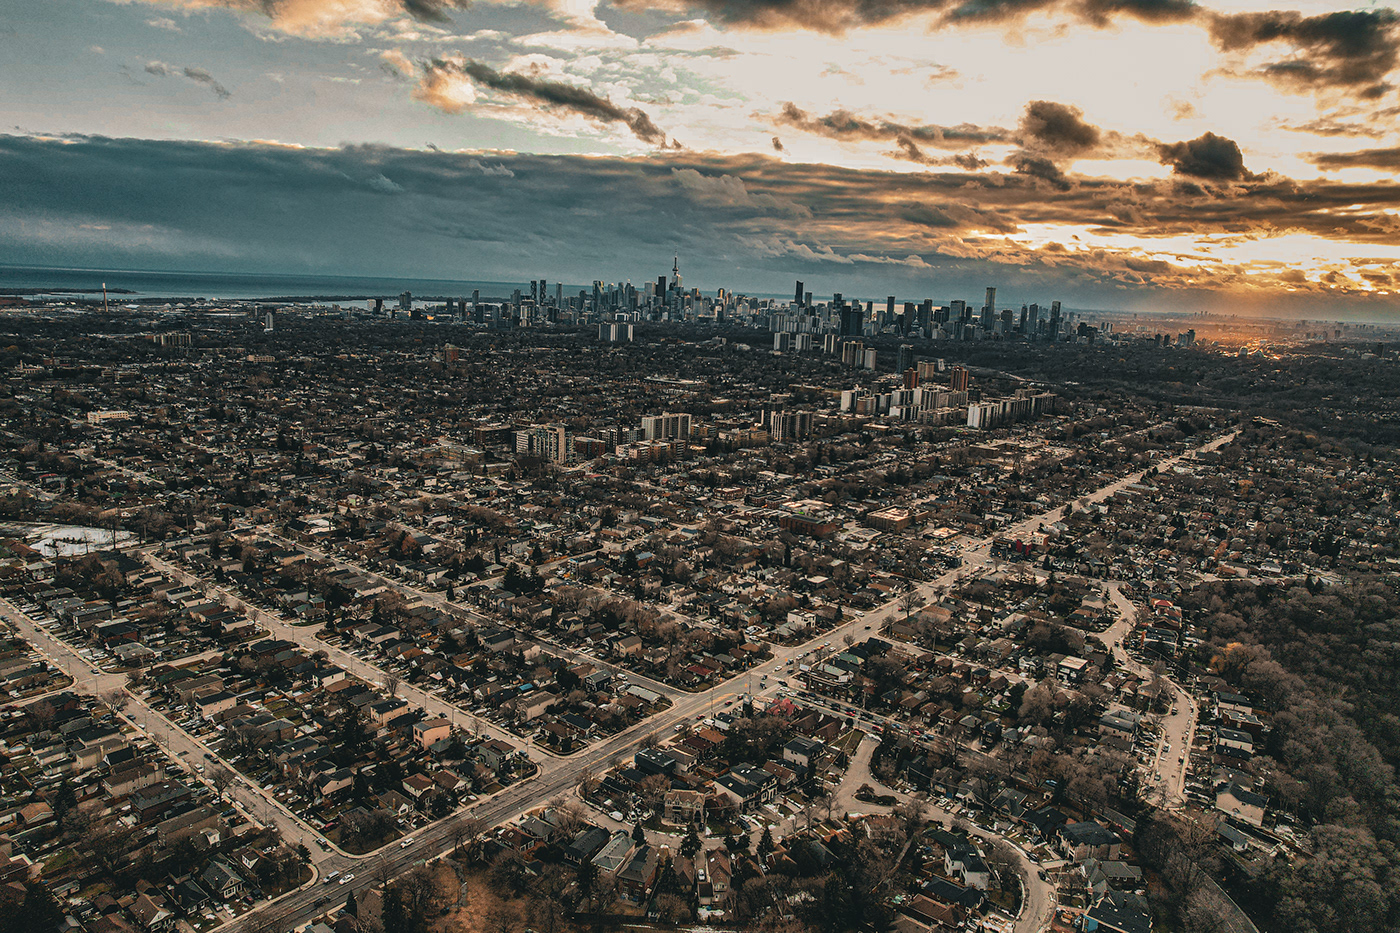 A view of Toronto like you've never seen before. This stunning image captures the city's incredible 